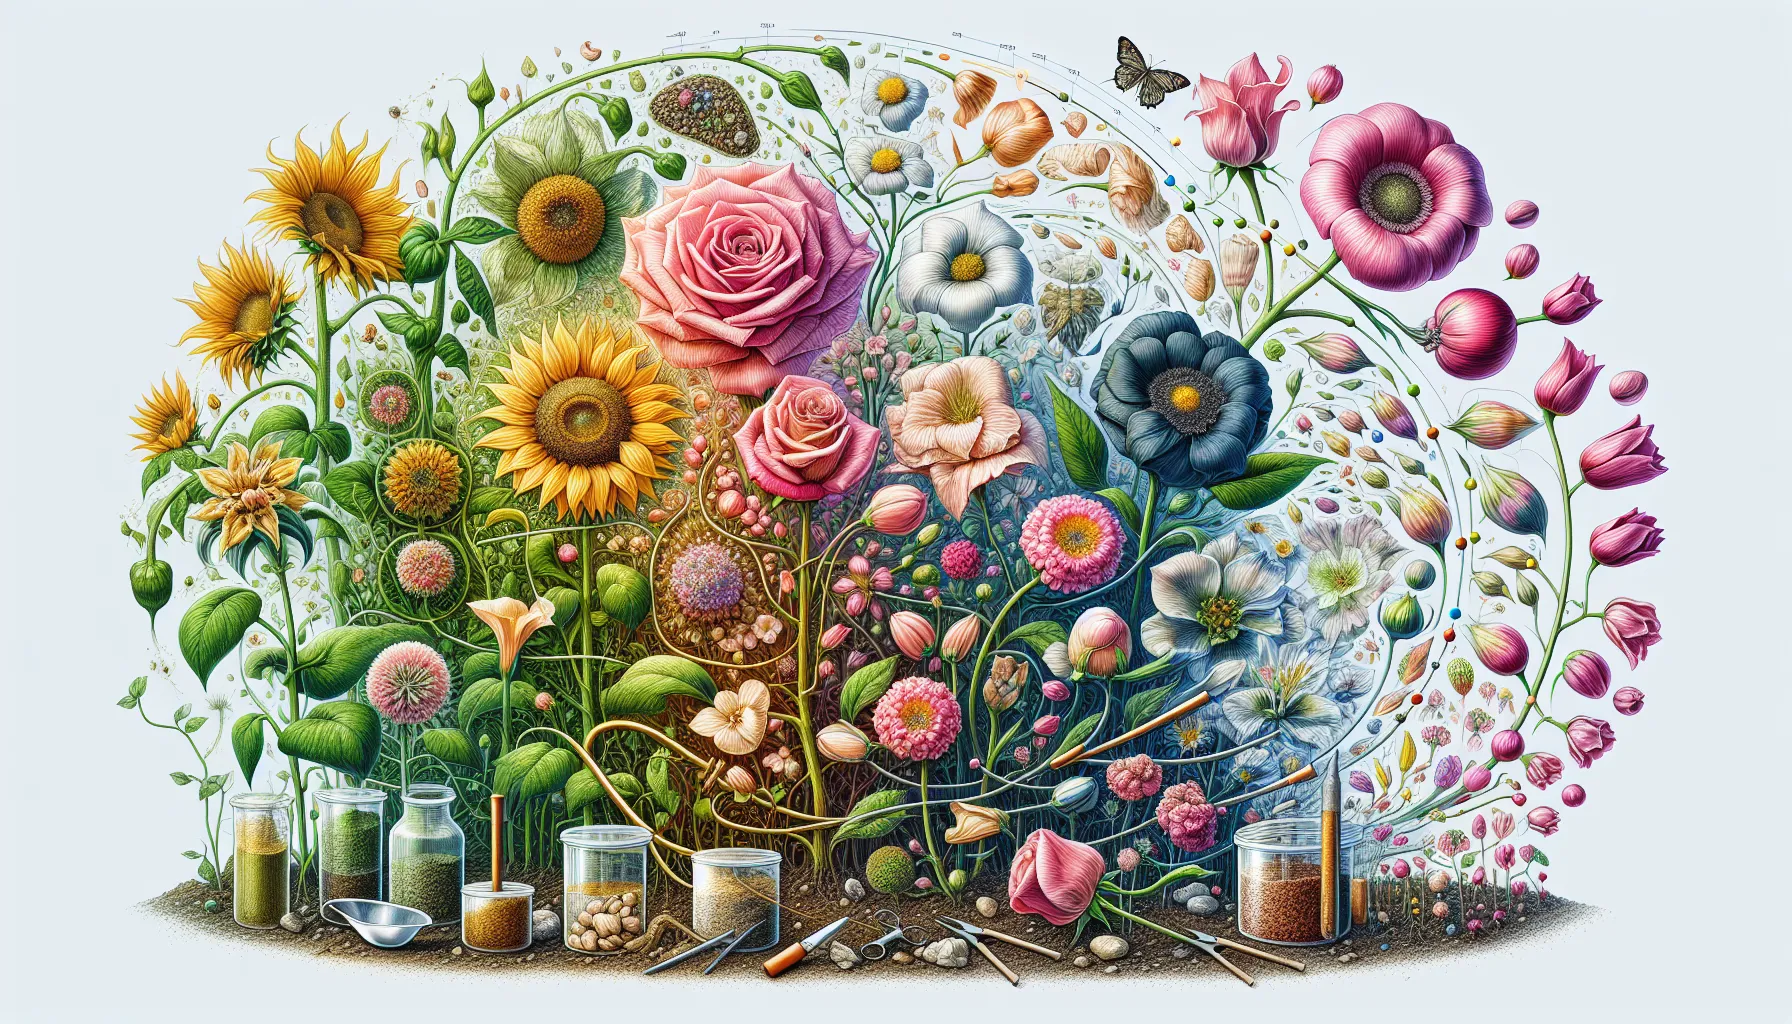 An illustration showing a diverse array of flowers in full bloom next to gardening tools, prompting the question, "how long does it take for flowers to grow?"